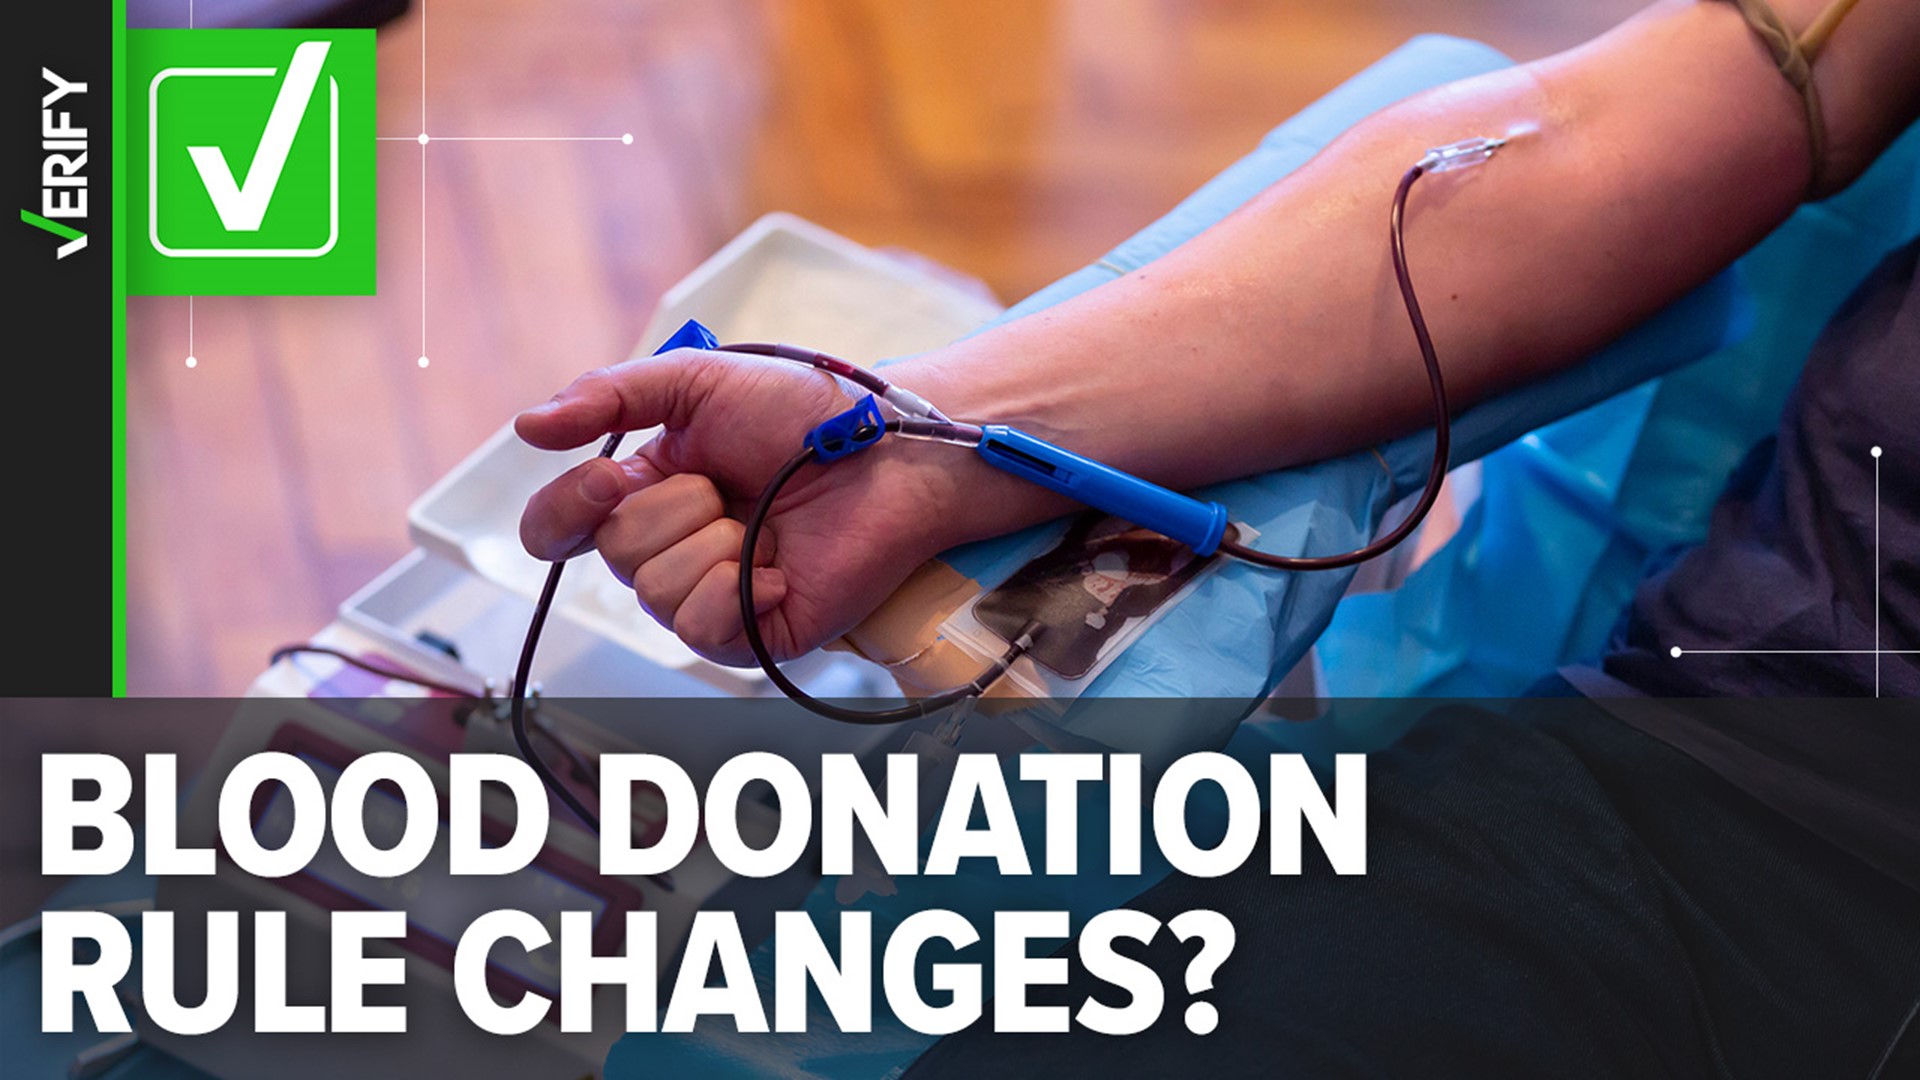 The Red Cross and other blood donation centers are implementing FDA guidance that allows more men who have sex with men to give blood.